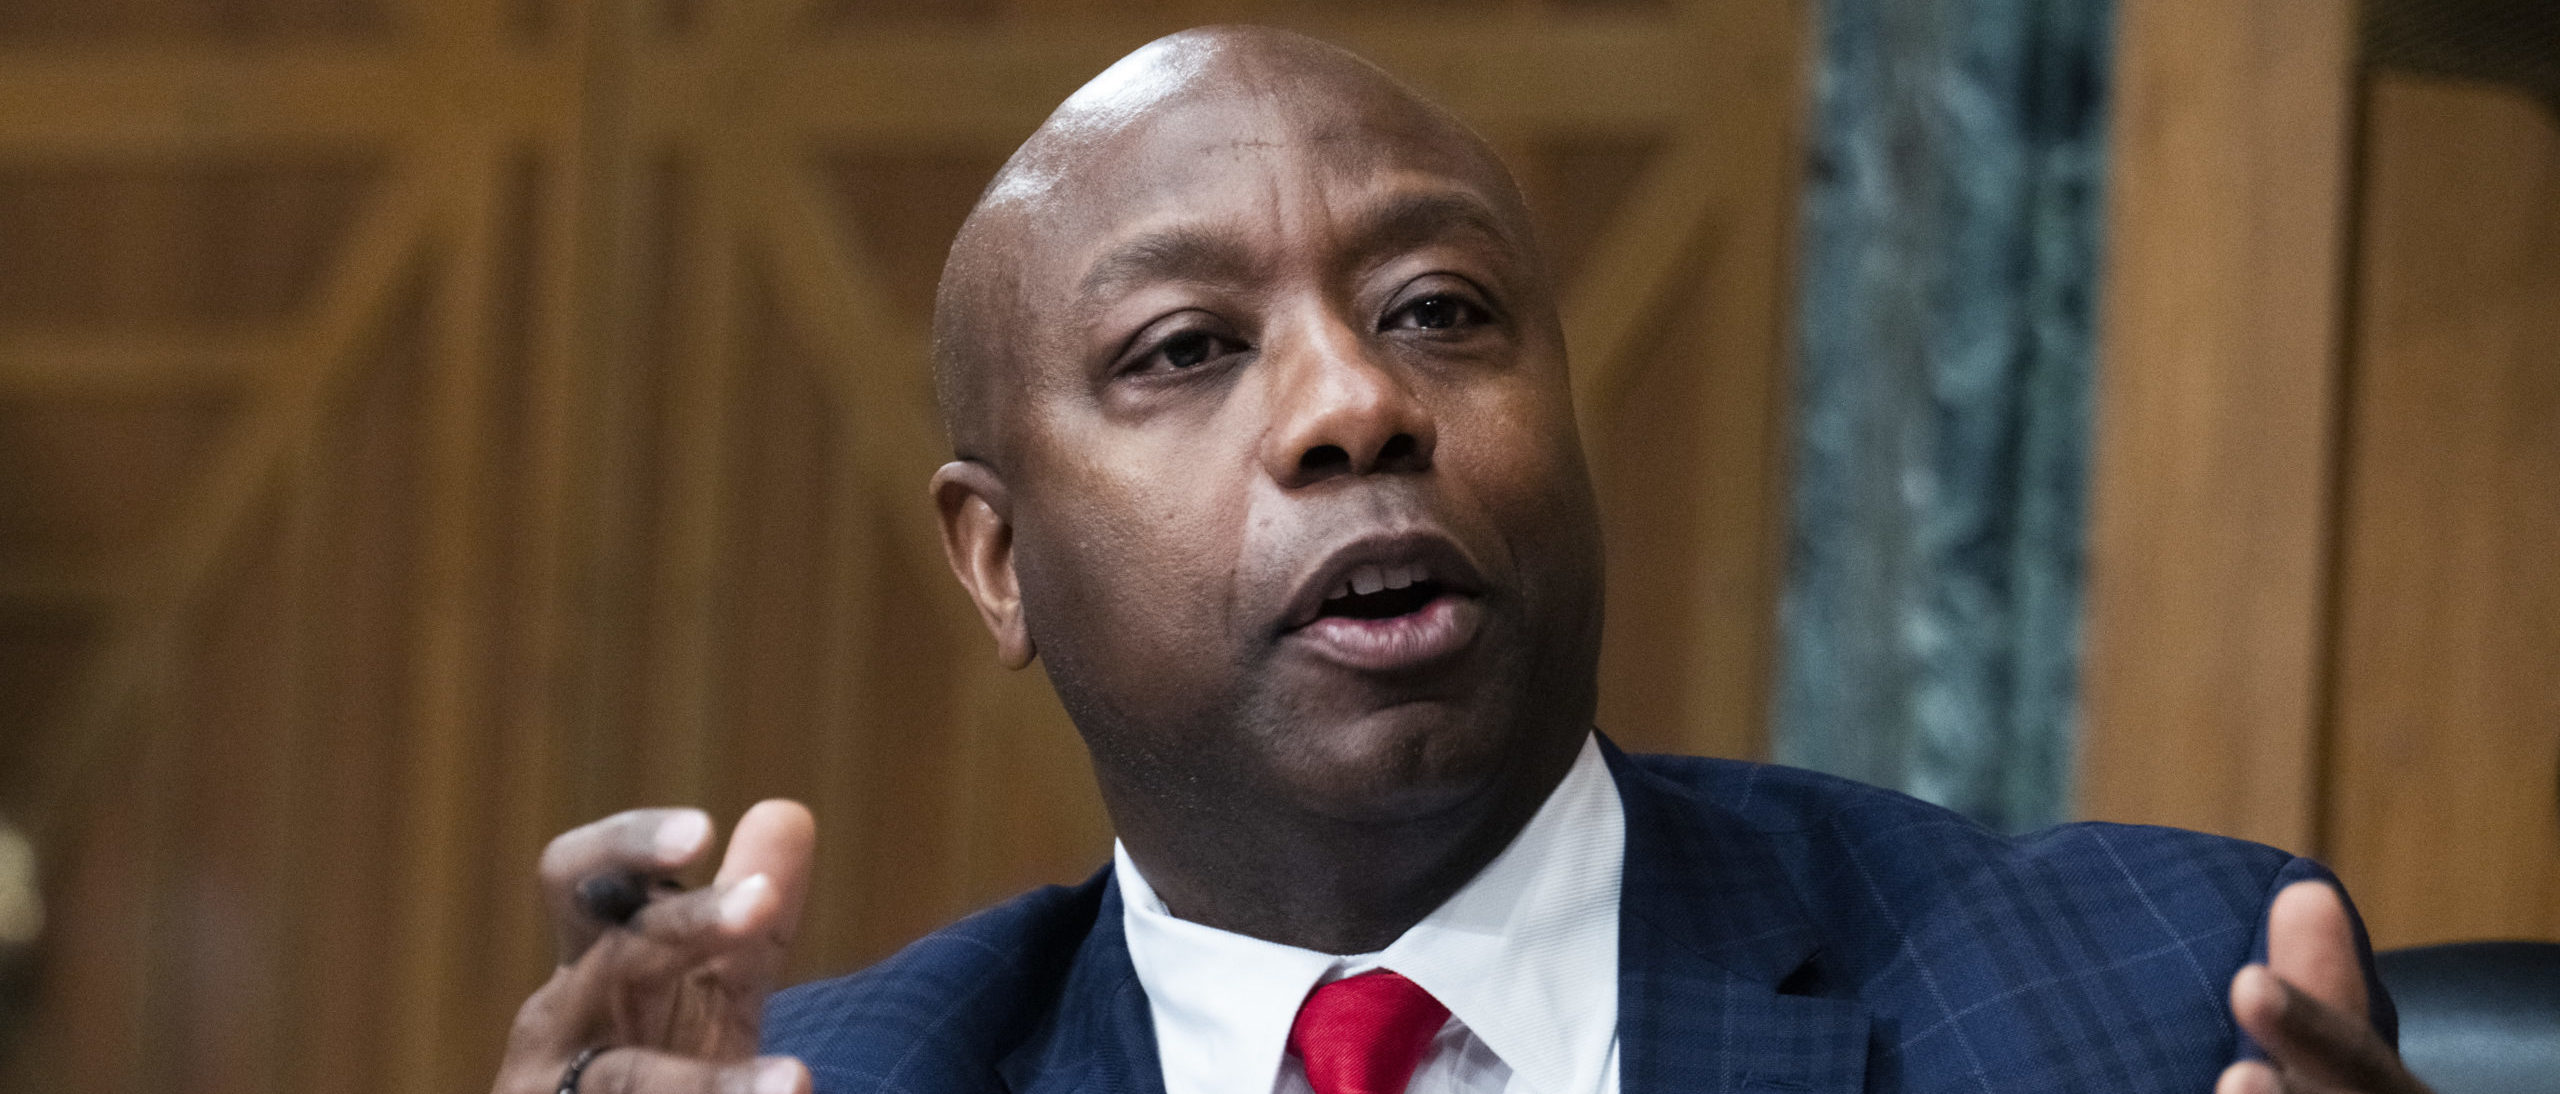 NYT Refused To Run Op-Ed From Sen. Tim Scott Without Checking First With Schumer, Bari Weiss Says